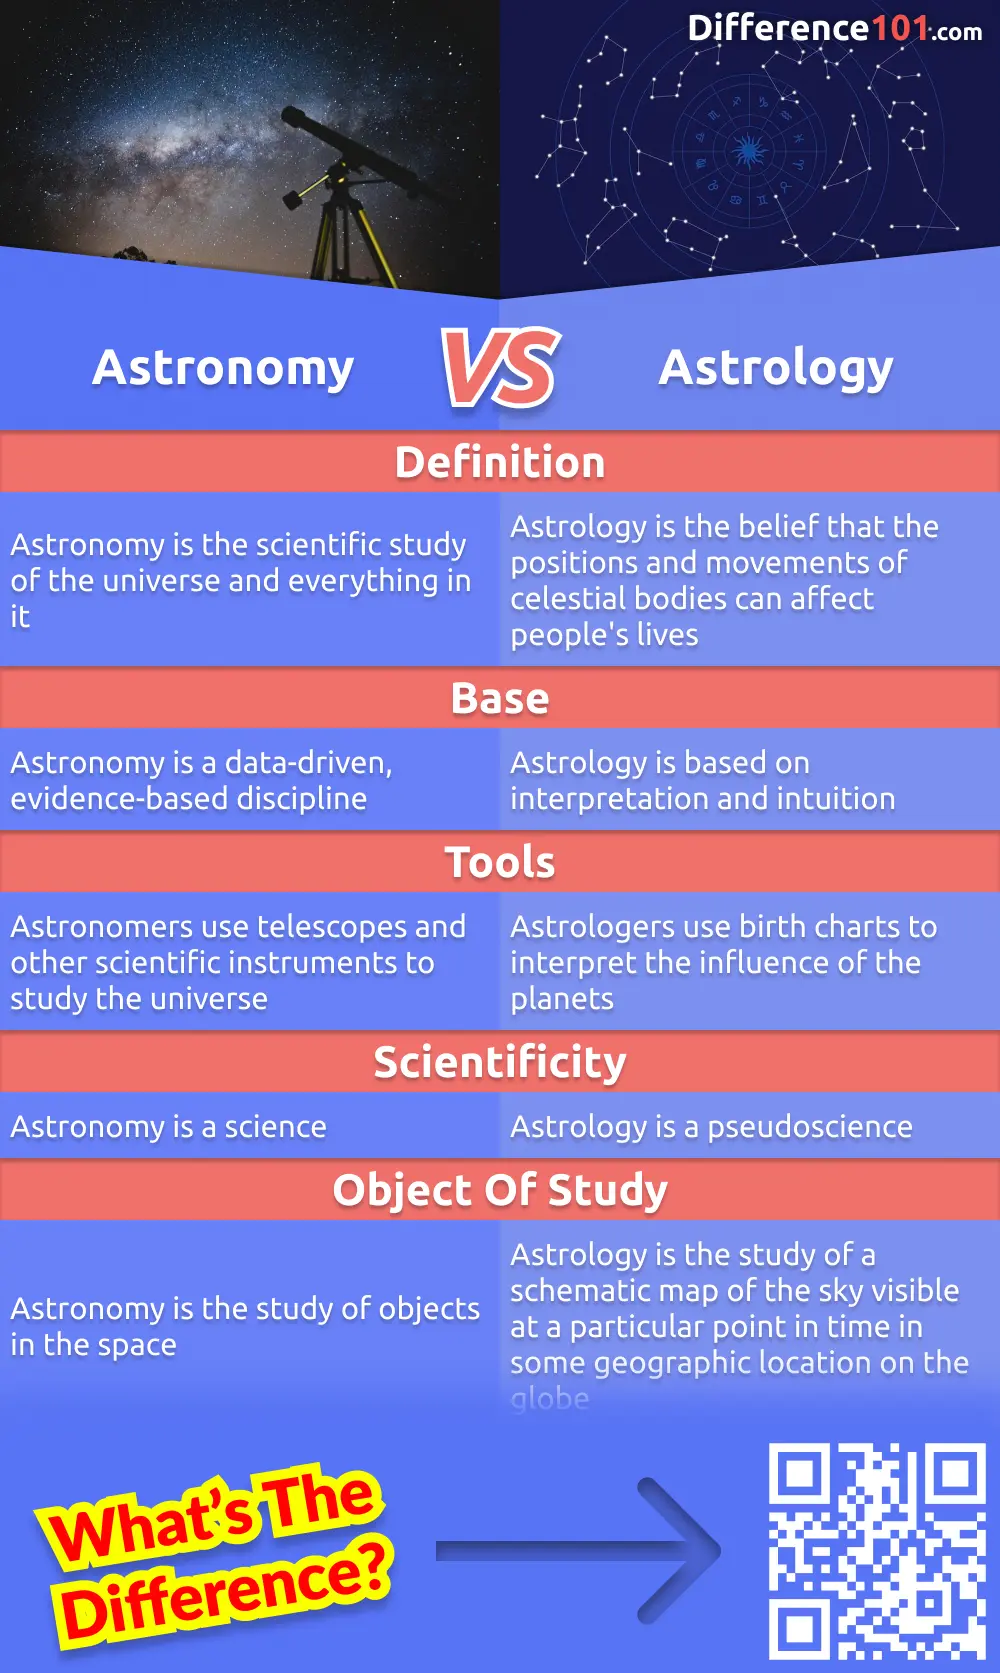 Understanding the Difference between Astrology and Astronomy